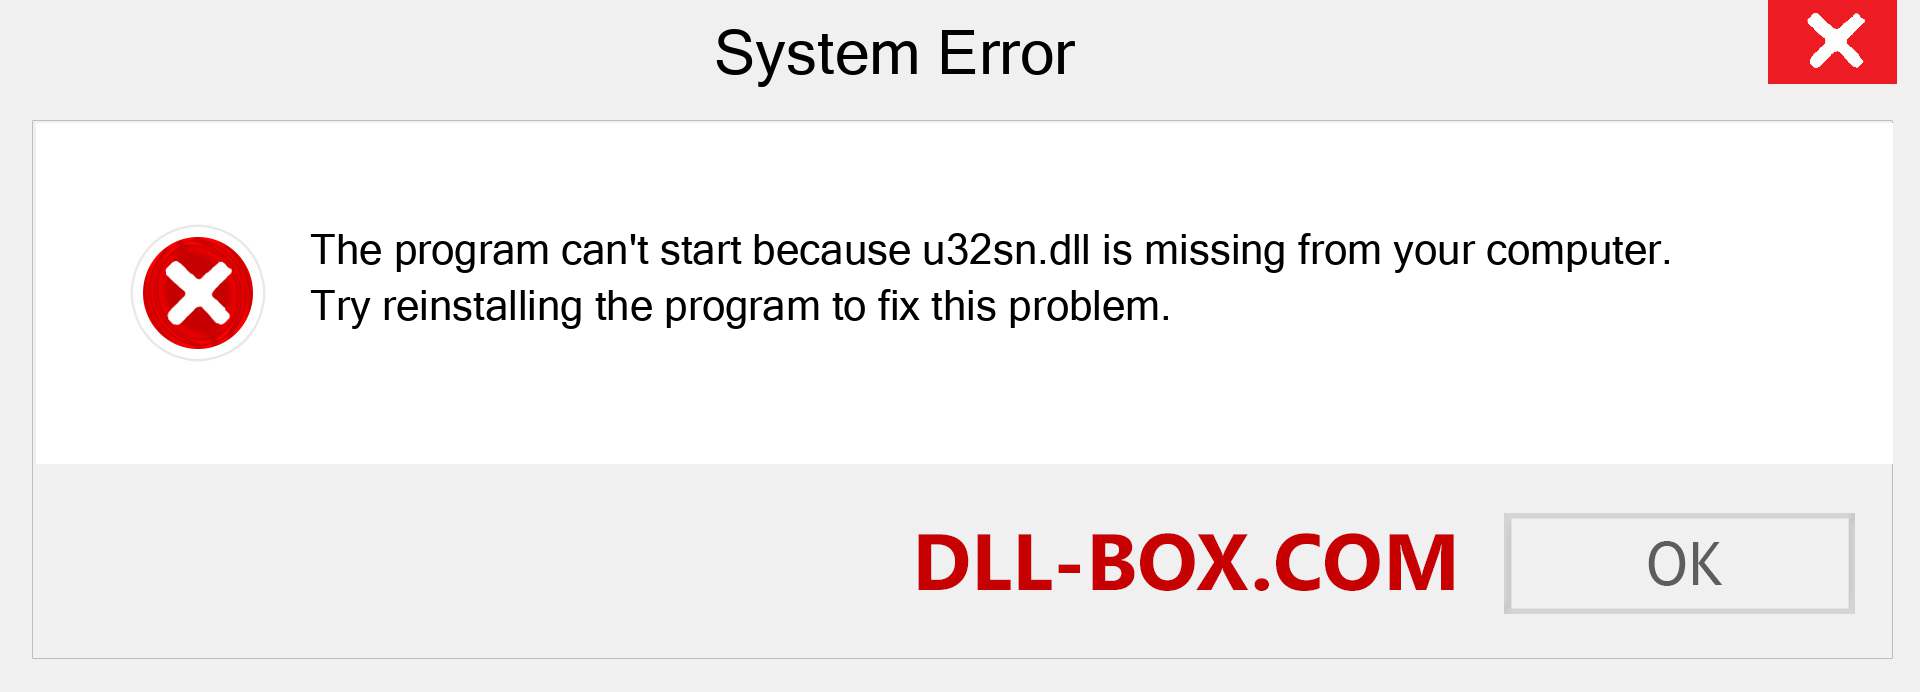  u32sn.dll file is missing?. Download for Windows 7, 8, 10 - Fix  u32sn dll Missing Error on Windows, photos, images